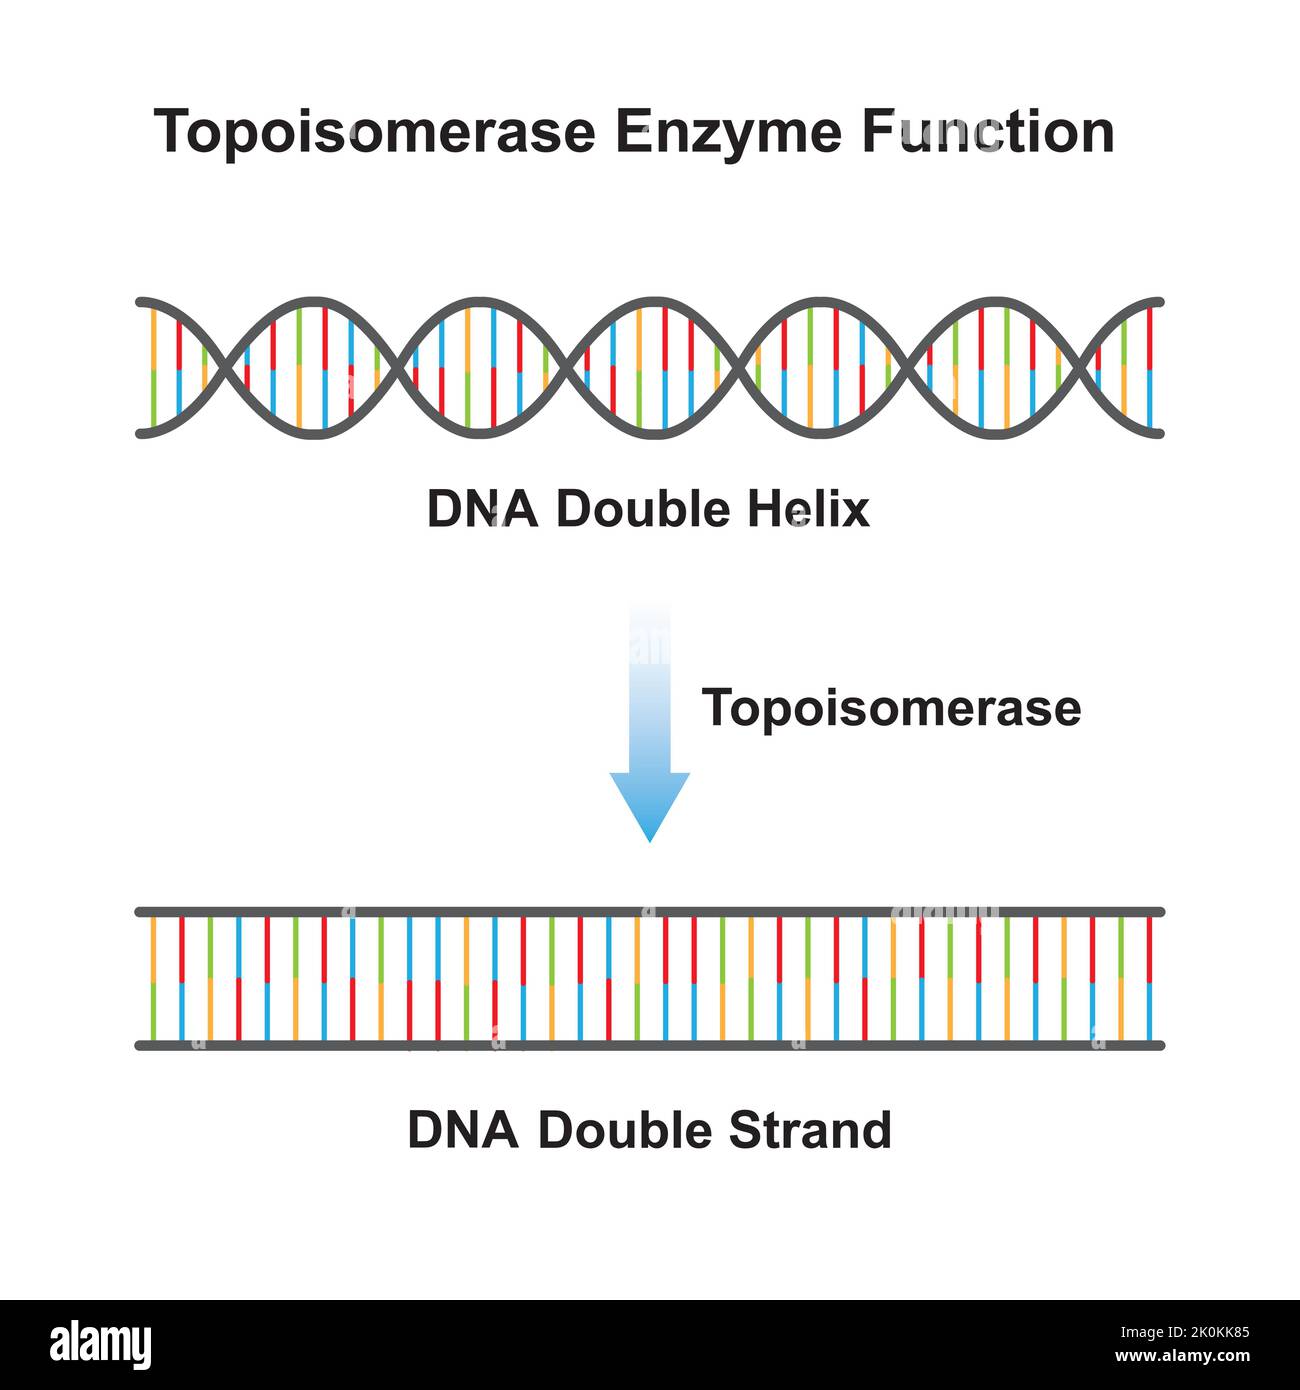 Scientific Designing of Topoisomerase Enzyme Effect on DNA Molecule. From DNA Helix to DNA Strand. Colorful Symbols. Vector Illustration. Stock Vector